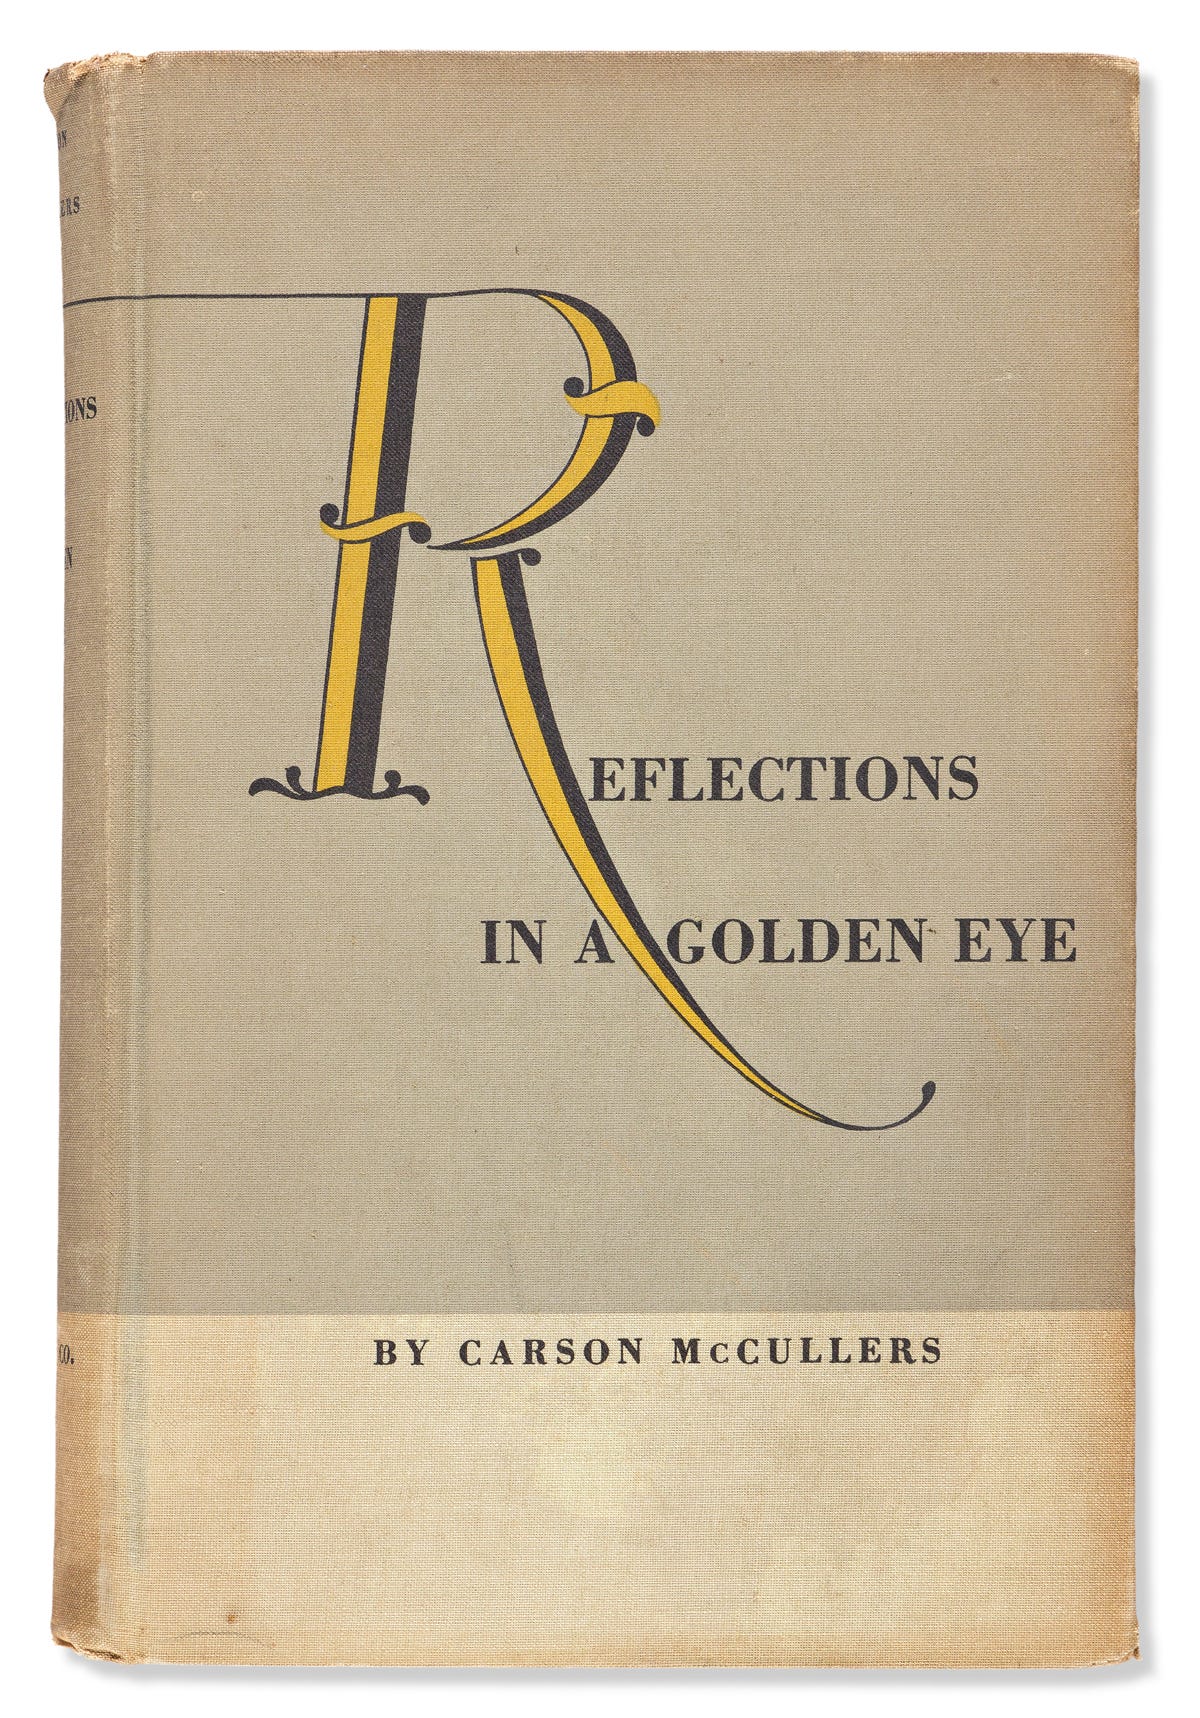 MILLER HENRY Carson McCullers Reflections in a Golden Eye Si